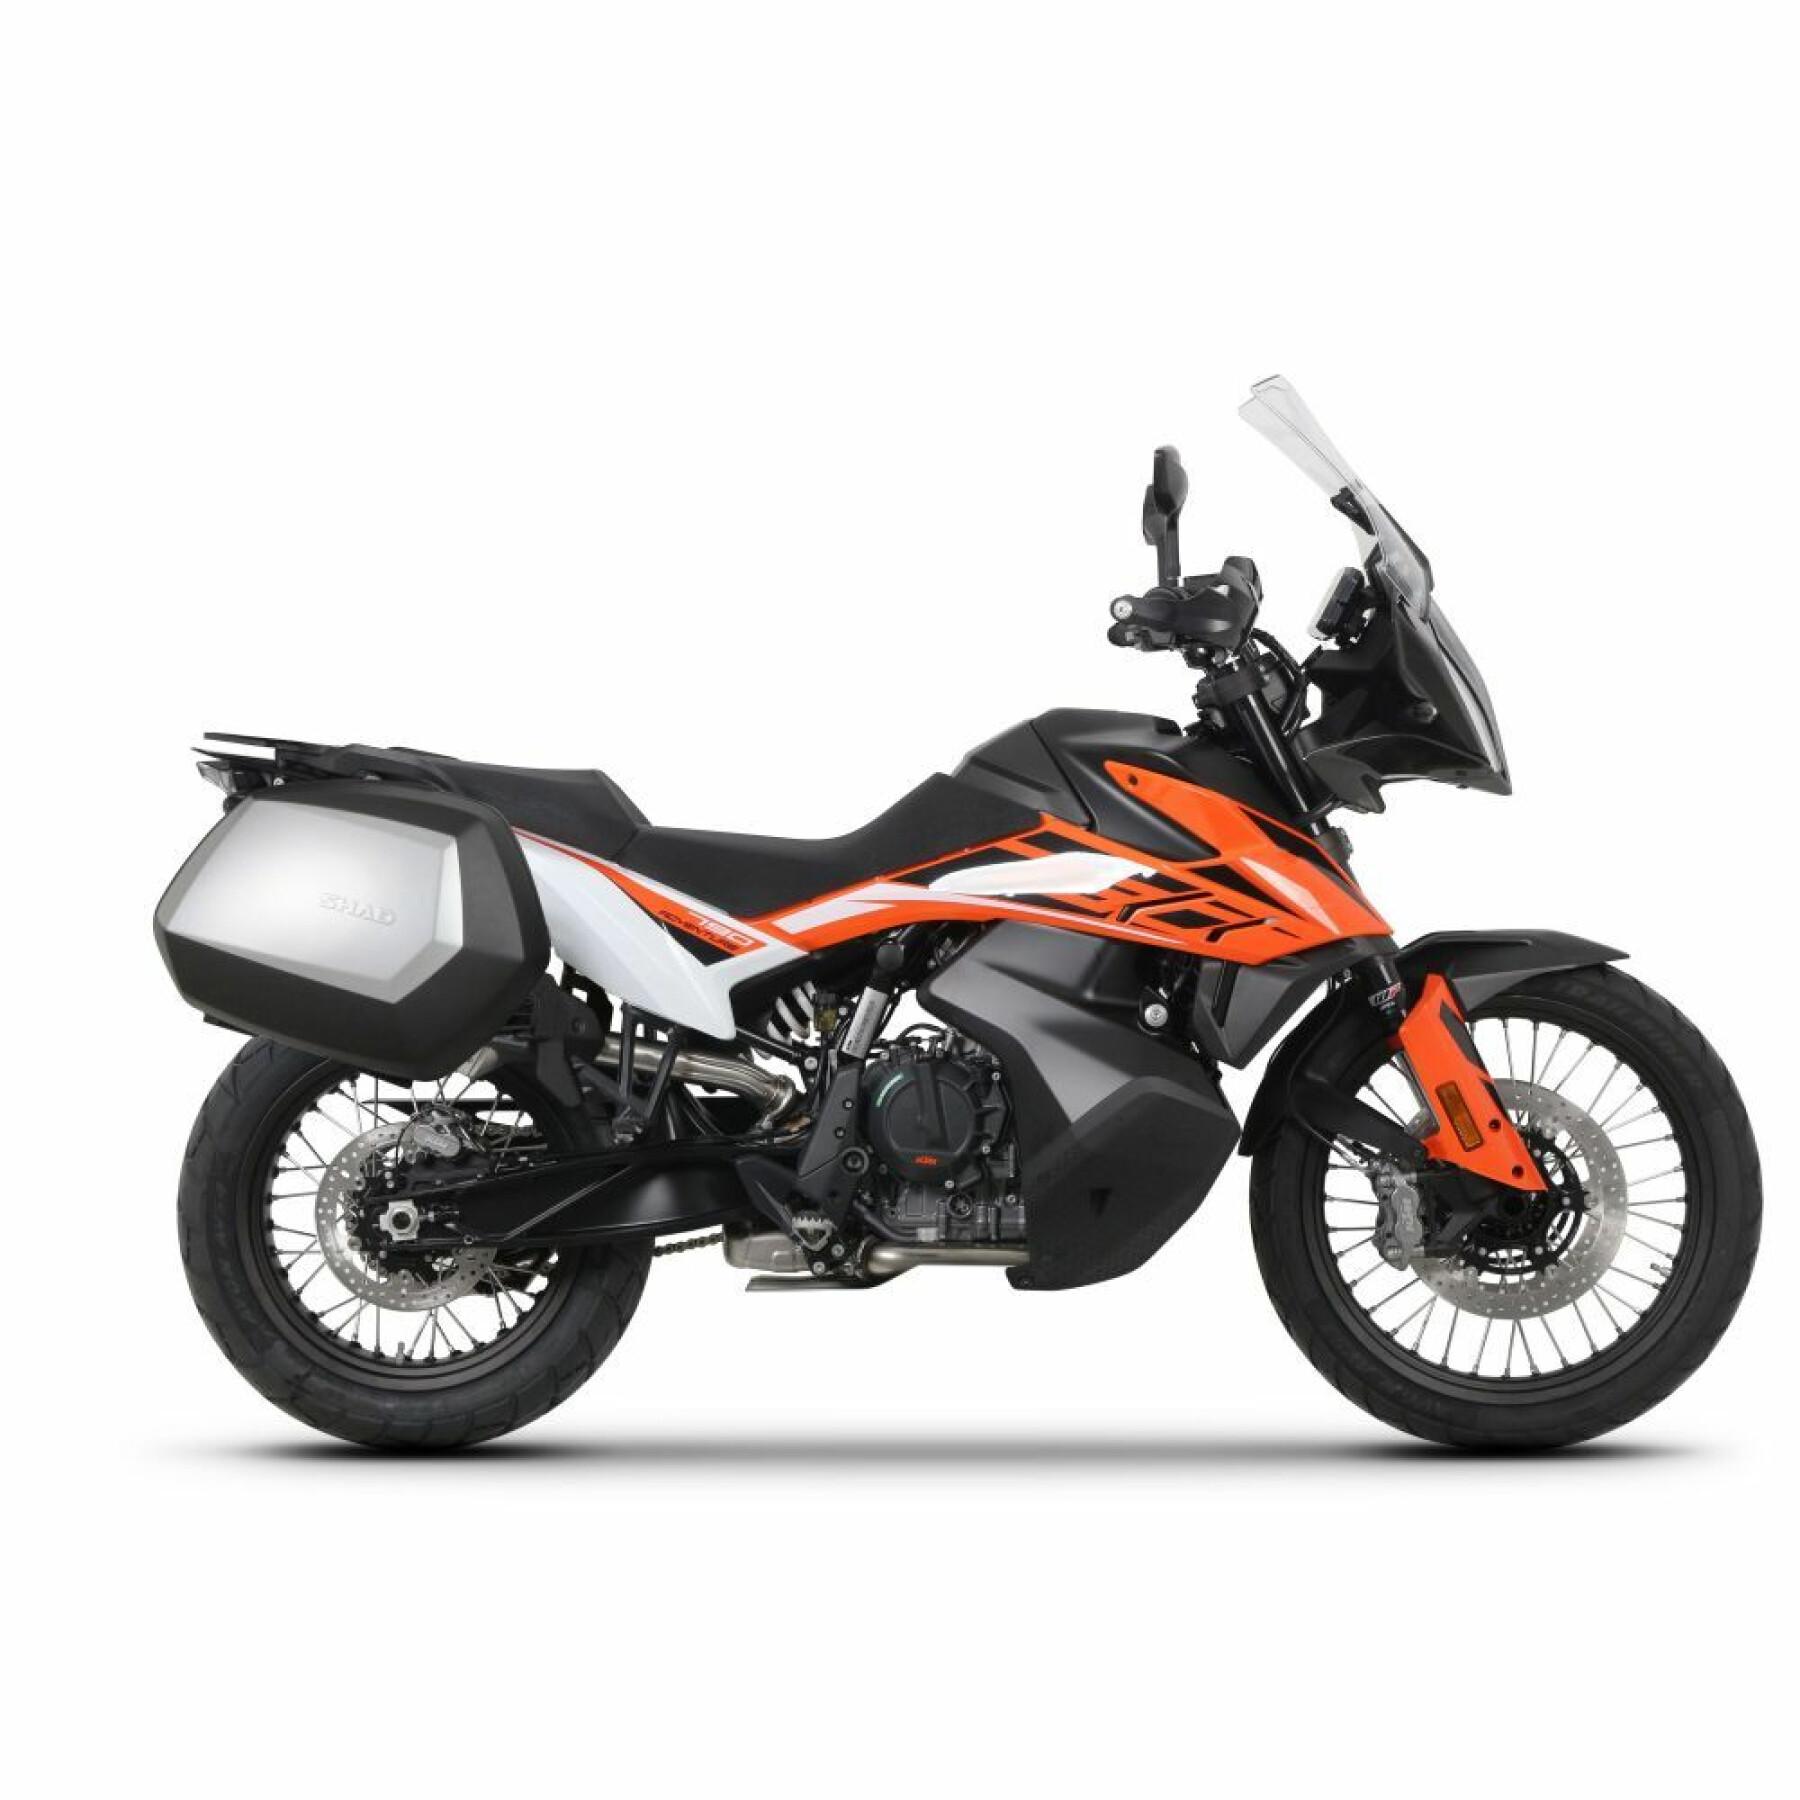 Side case support Shad 3P System KTM 790/890 Adventure